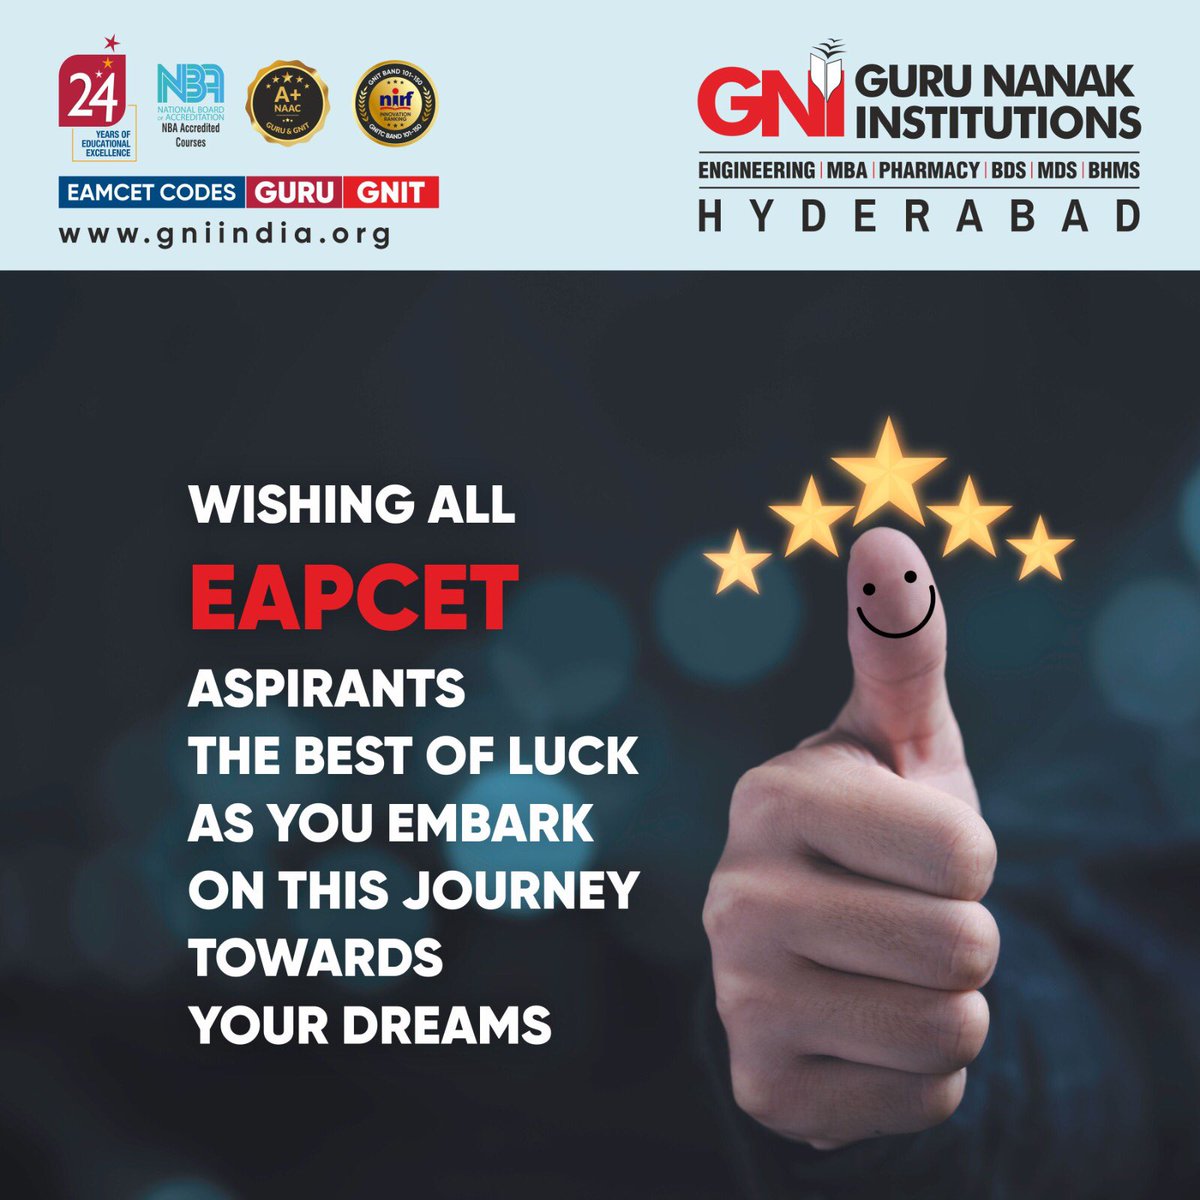 As EAPCET exams near, Gurunanak Institutions stands in solidarity with you. Trust your prep, stay focused, and keep determination strong. Your hard work will lead to success! 💼📝 #EAPCET #Determination #GurunanakInstitutions #SuccessIsYours